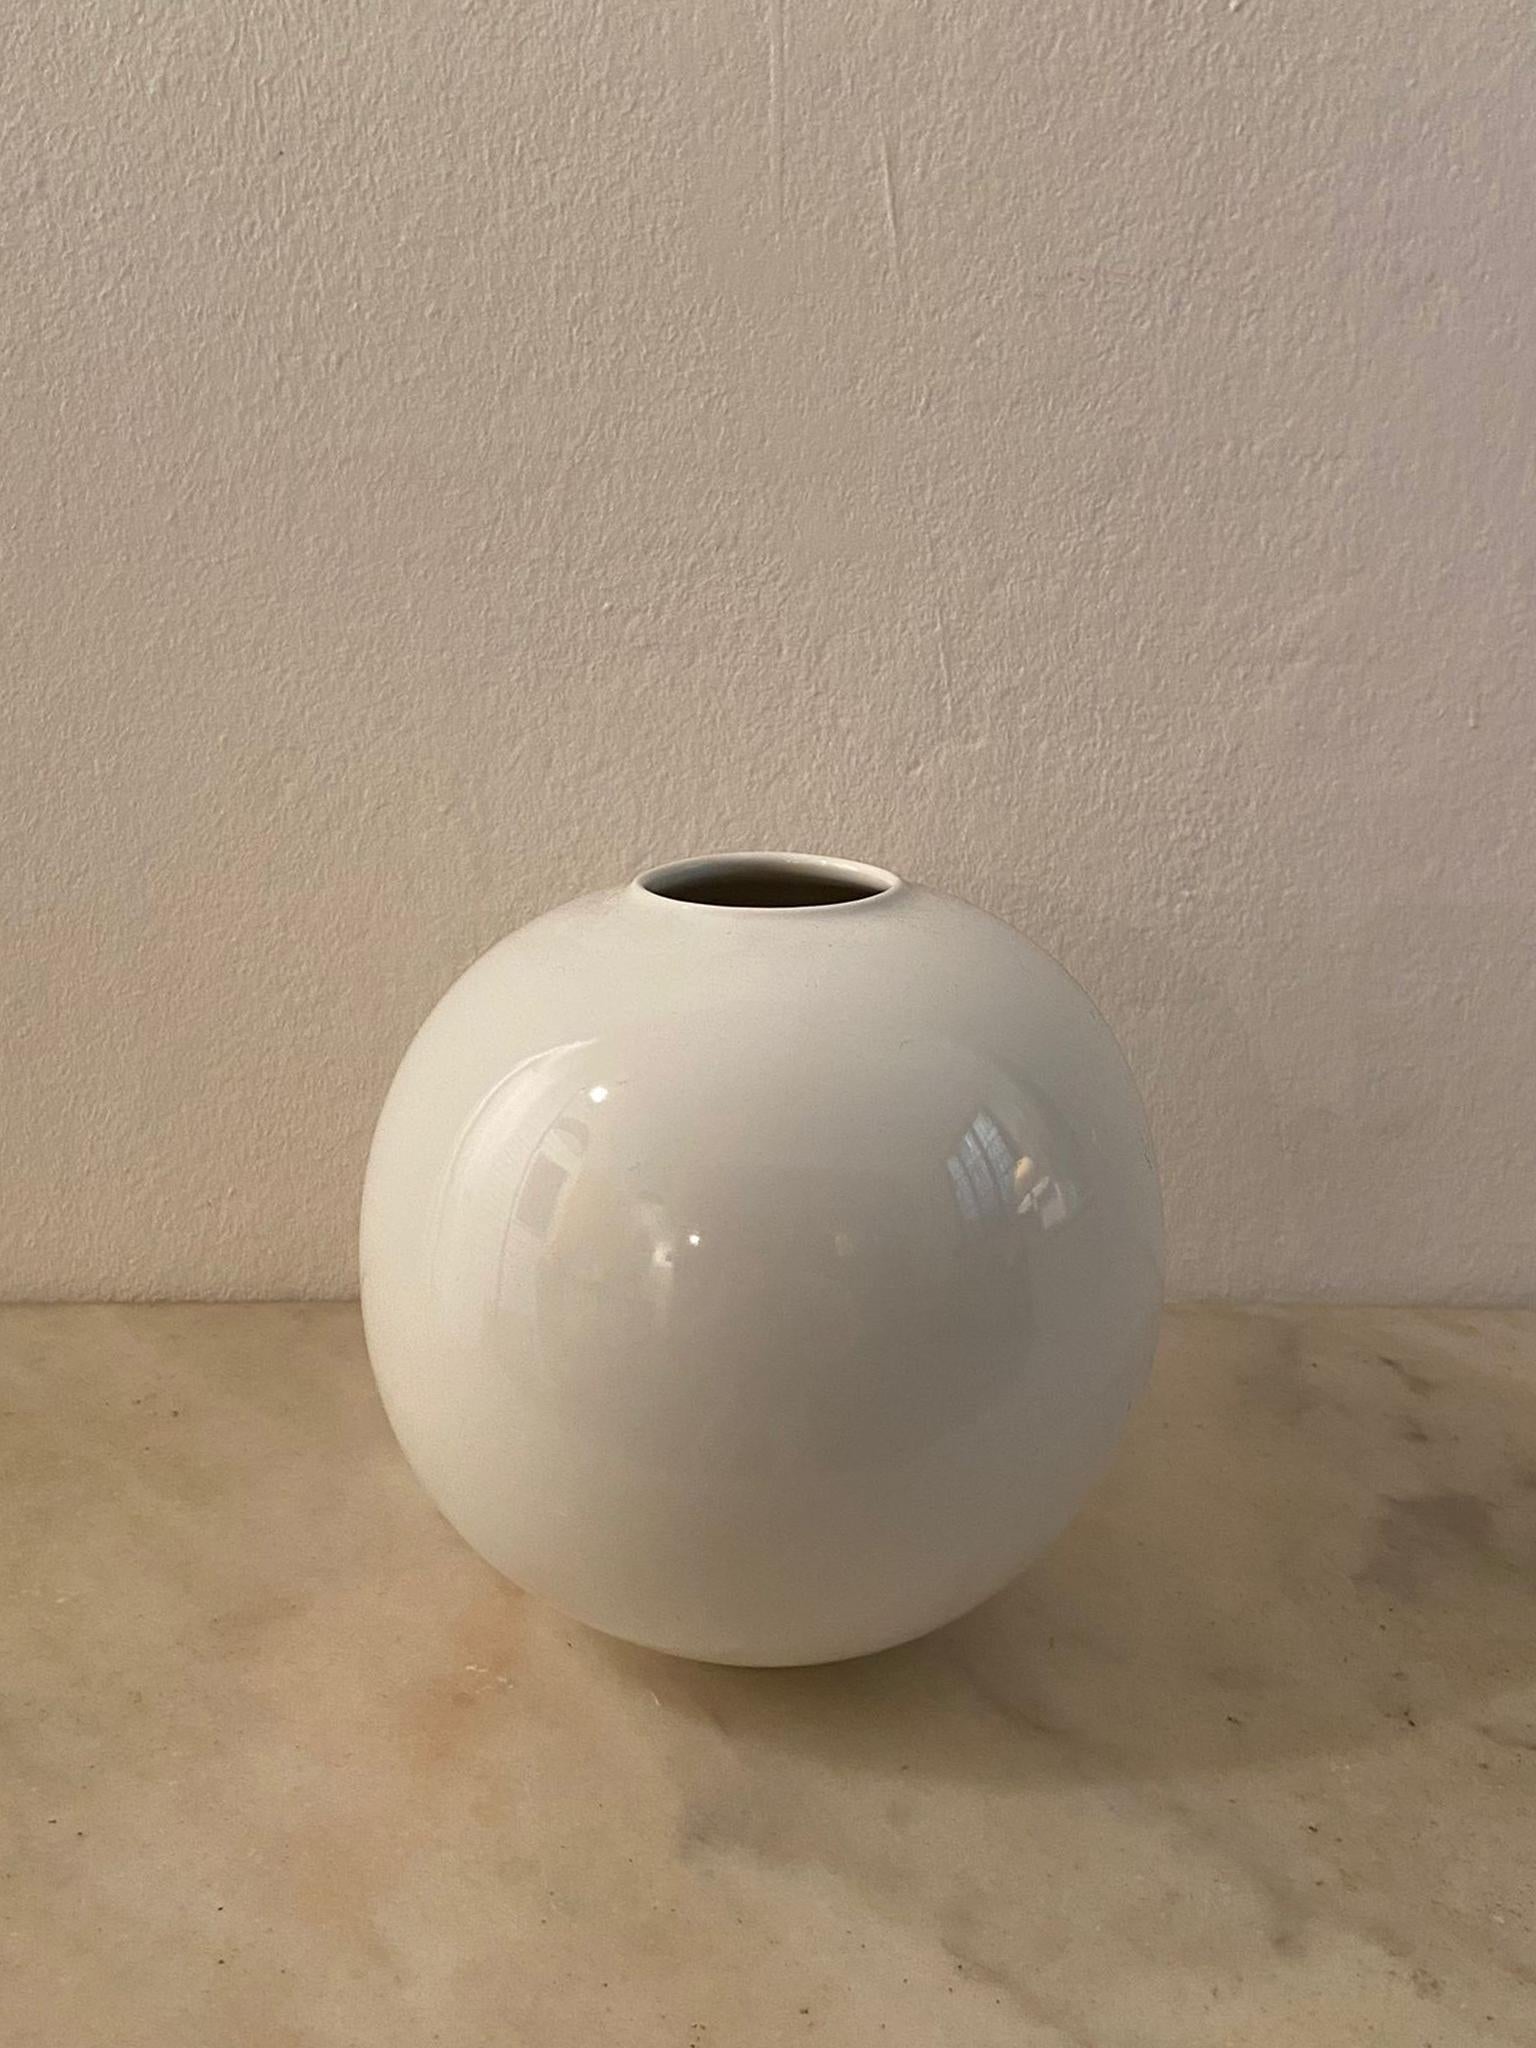 1970s astonishing space age white vase in ceramic by Gabbianelli, made in Italy.